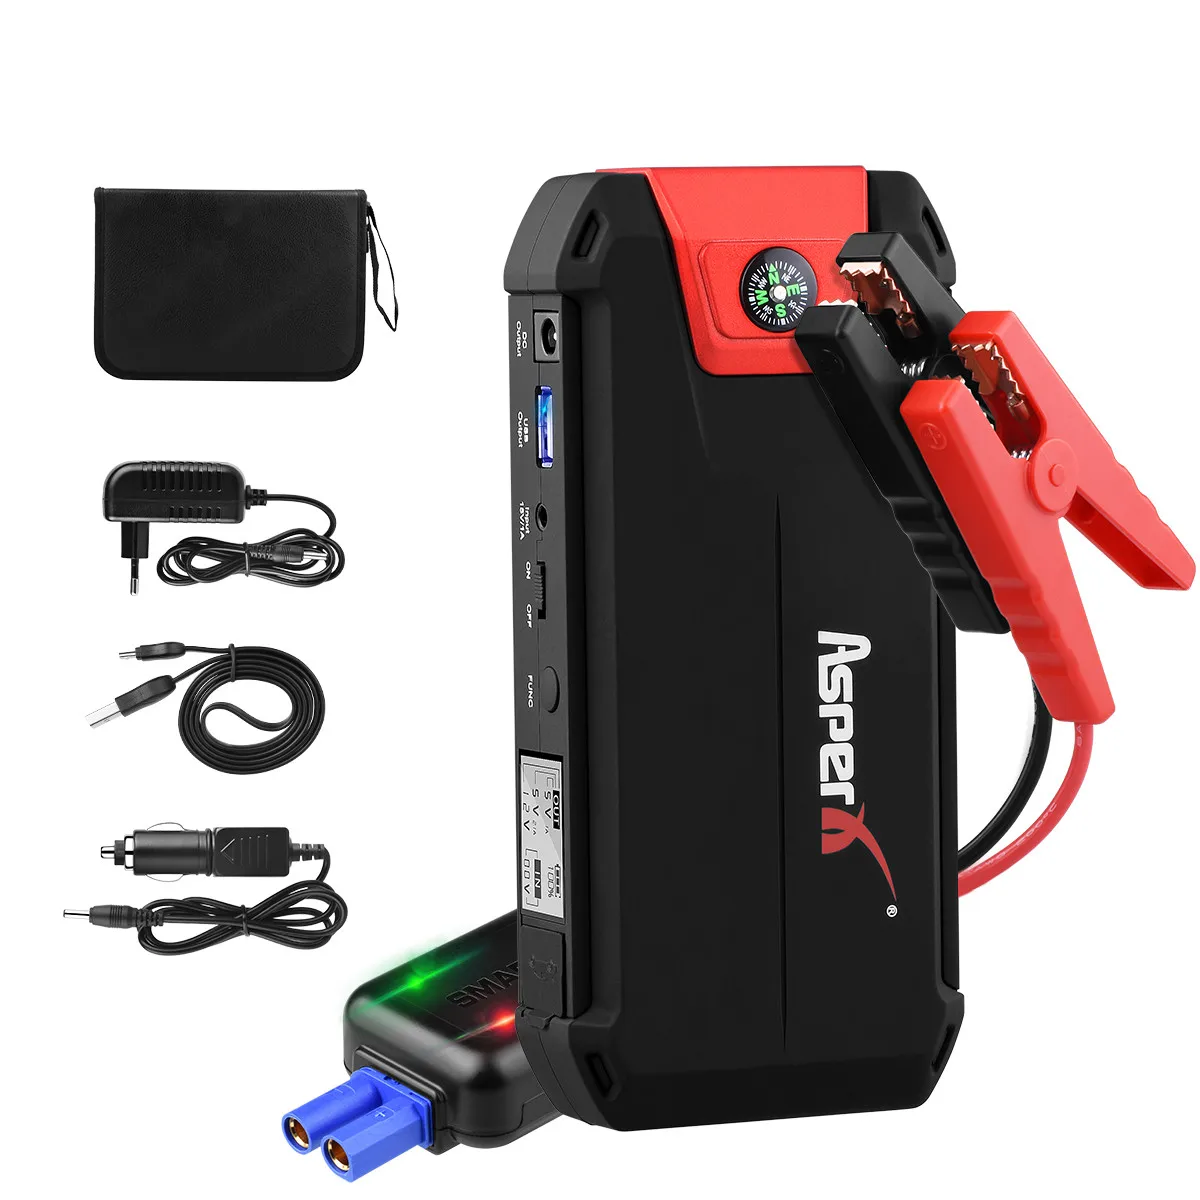 Asperx Portable Car Jump Starter 1000A Peak 13800mAH 12V Auto Battery Booster Power Pack with LCD Display Jumper Cable